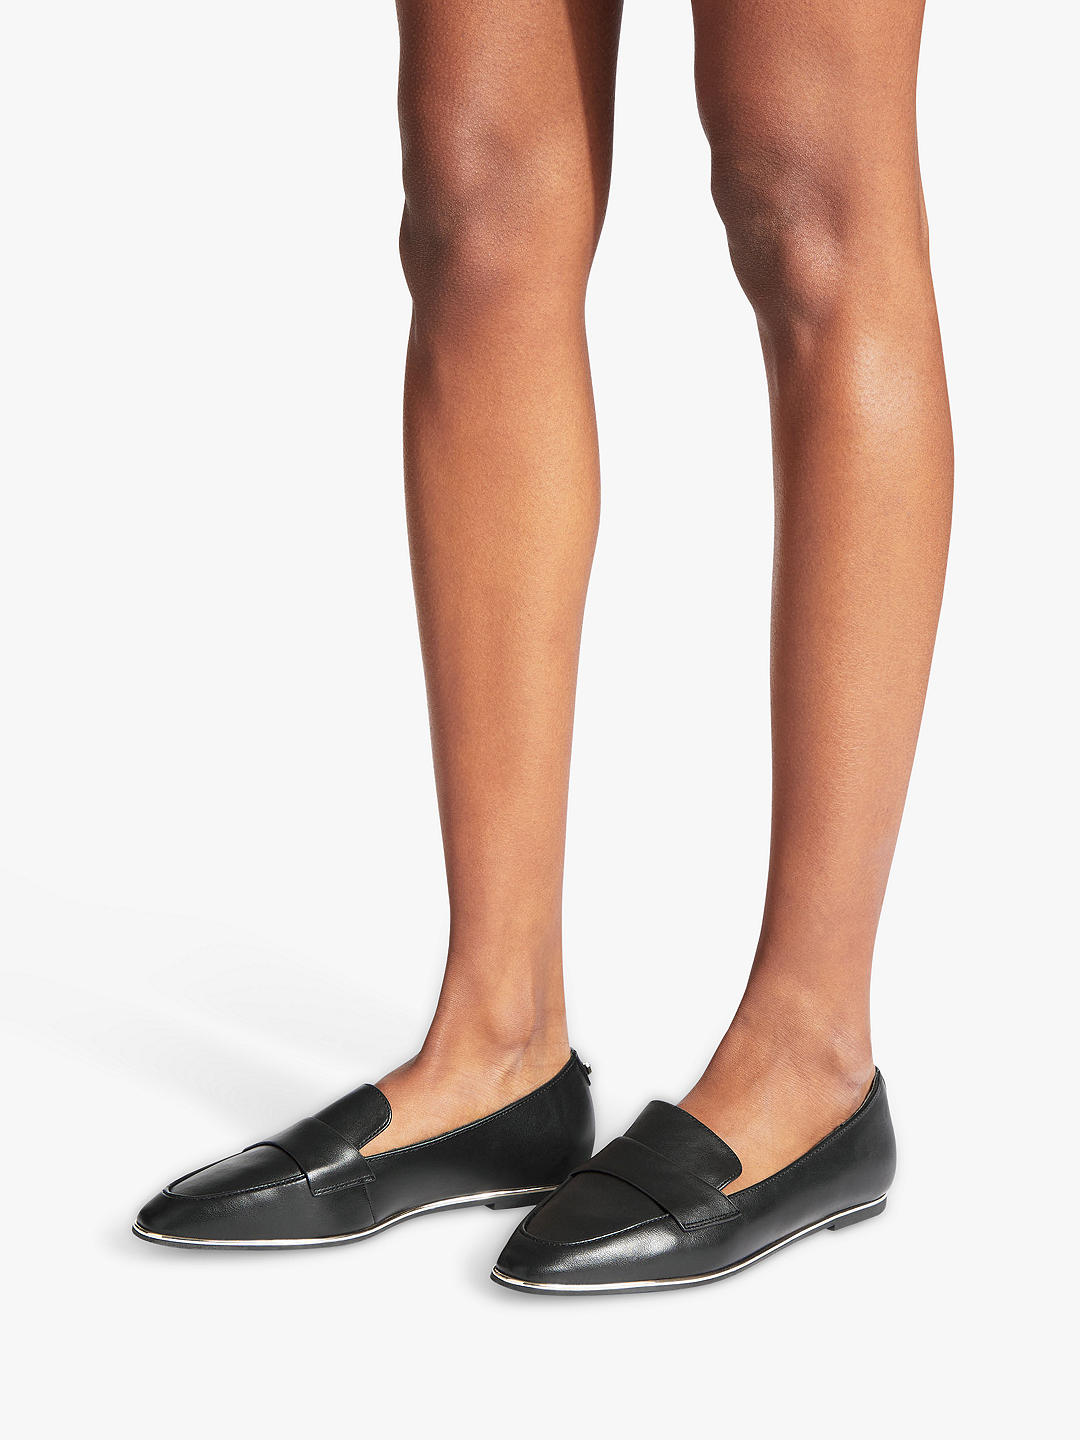 Carvela Lexie Pointed Toe Loafers, Black